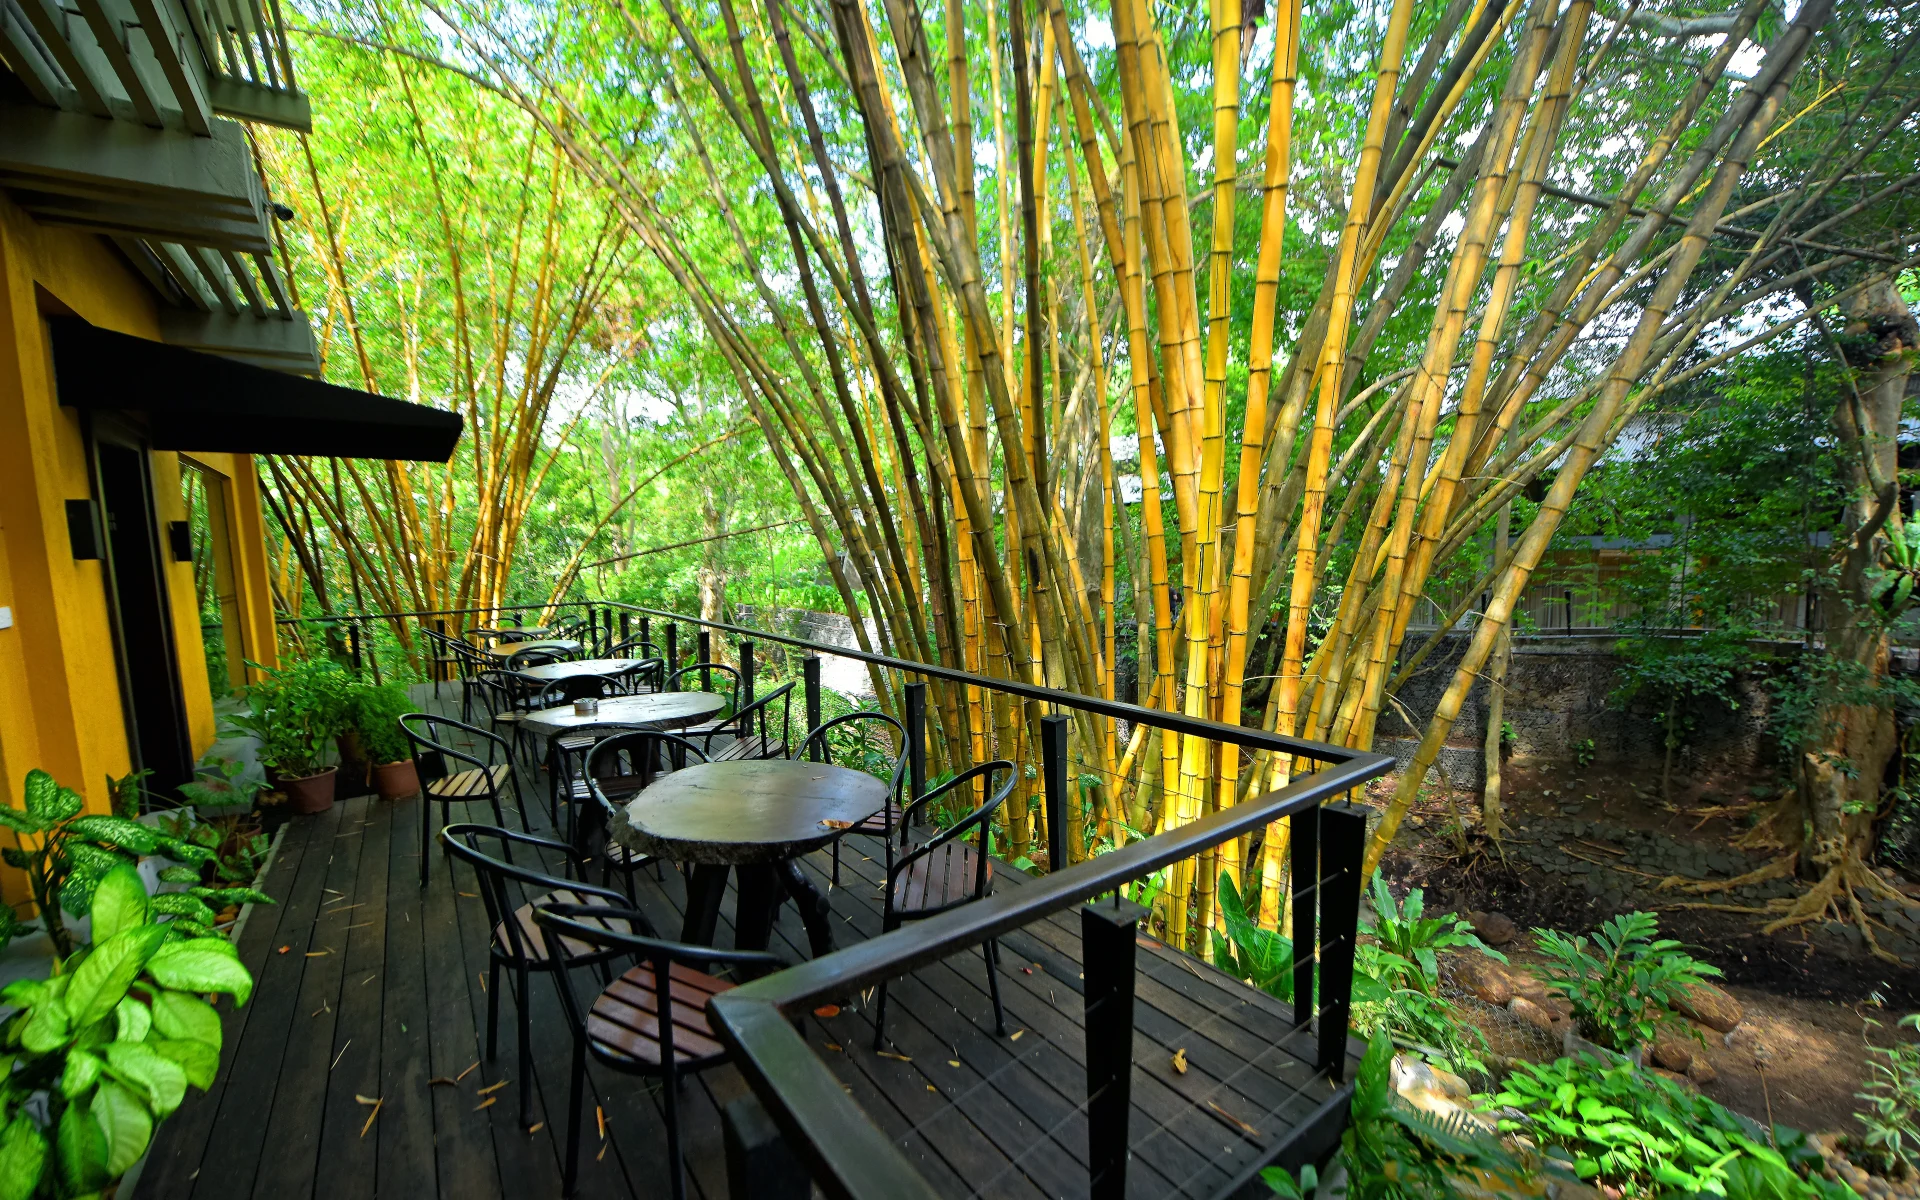 The Gala Bar opens up onto a veranda surrounded by towering bamboo.